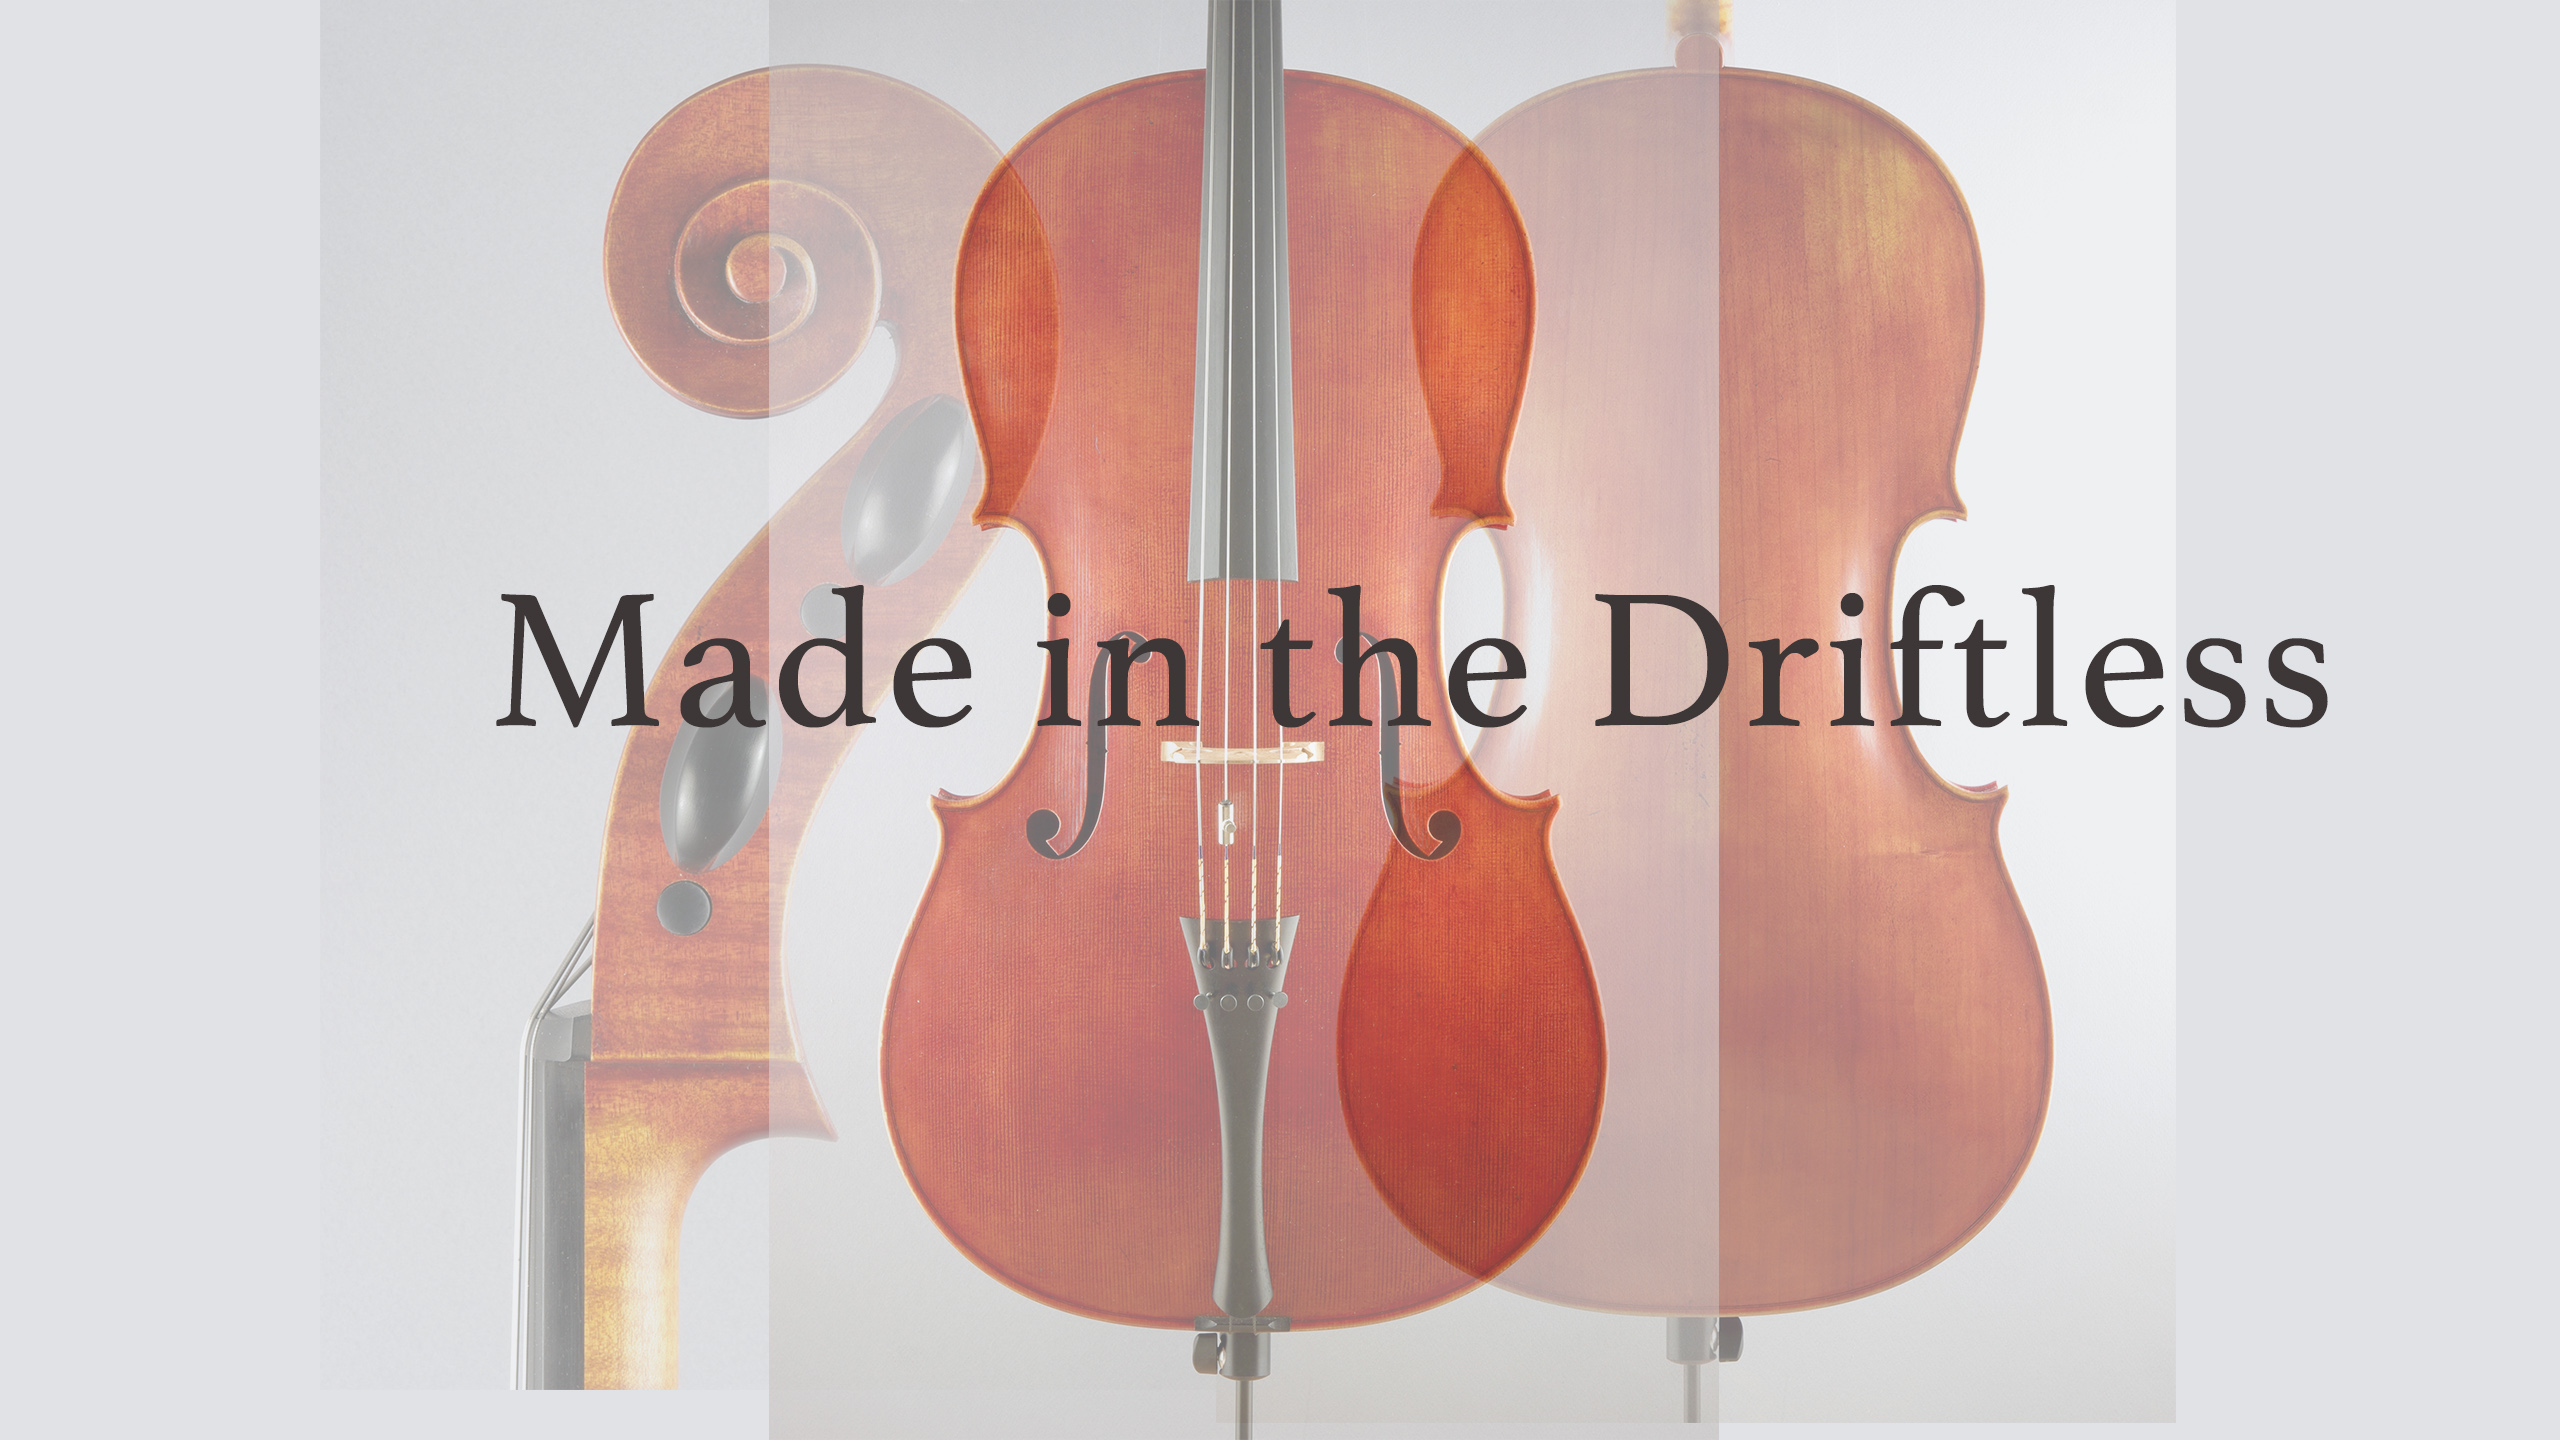 Made in the Driftless